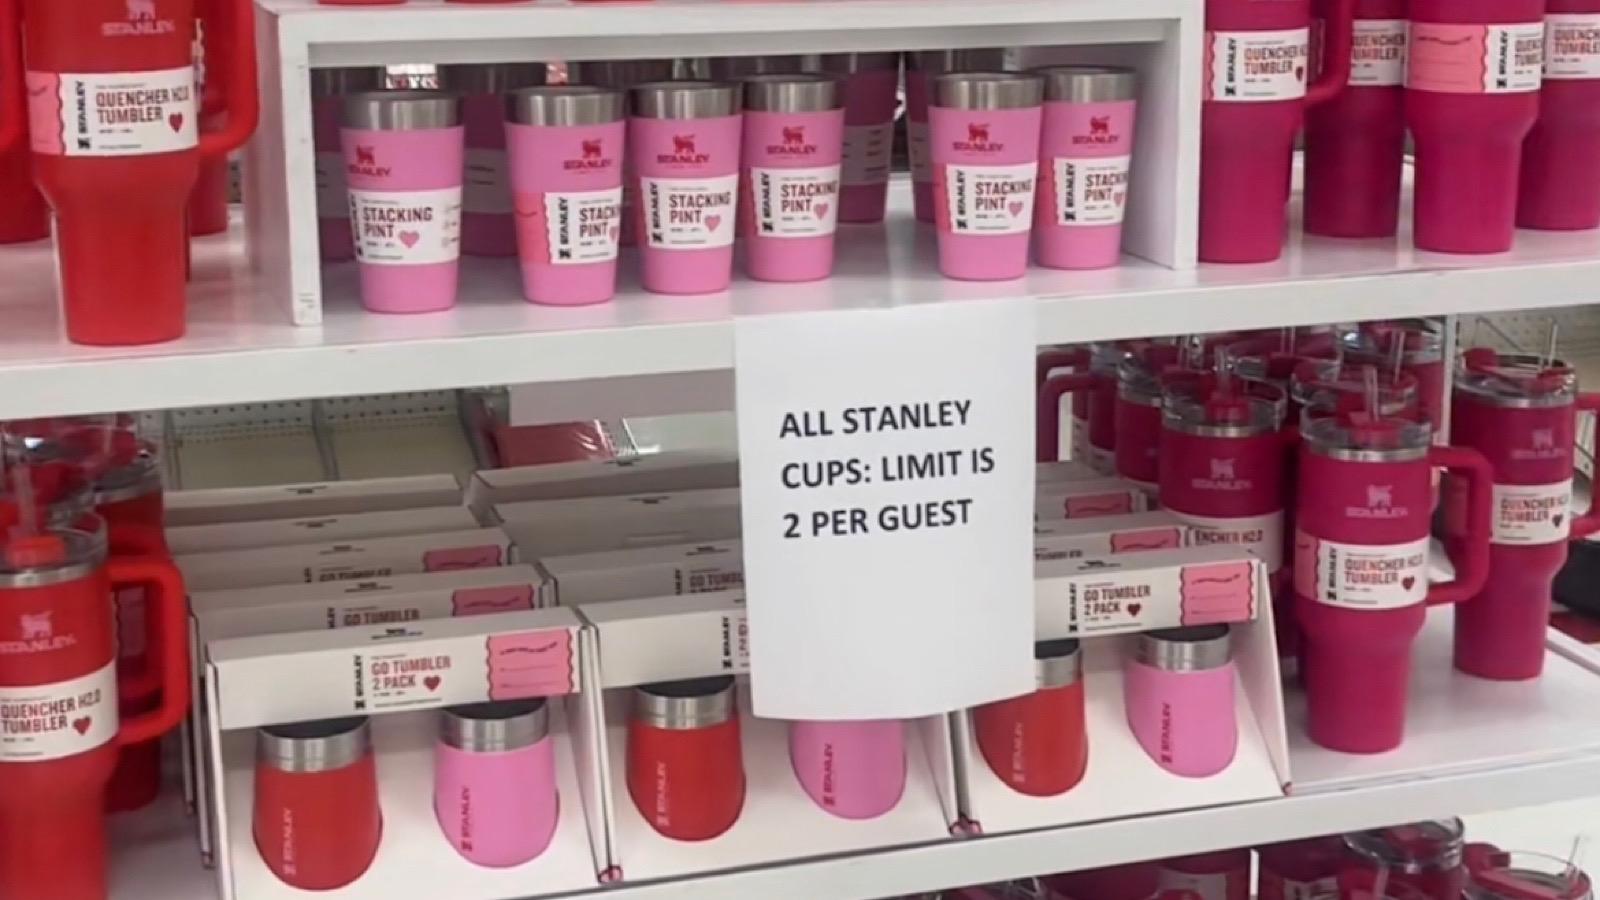 New Stanley Tumbler Colors Have Dropped at Target